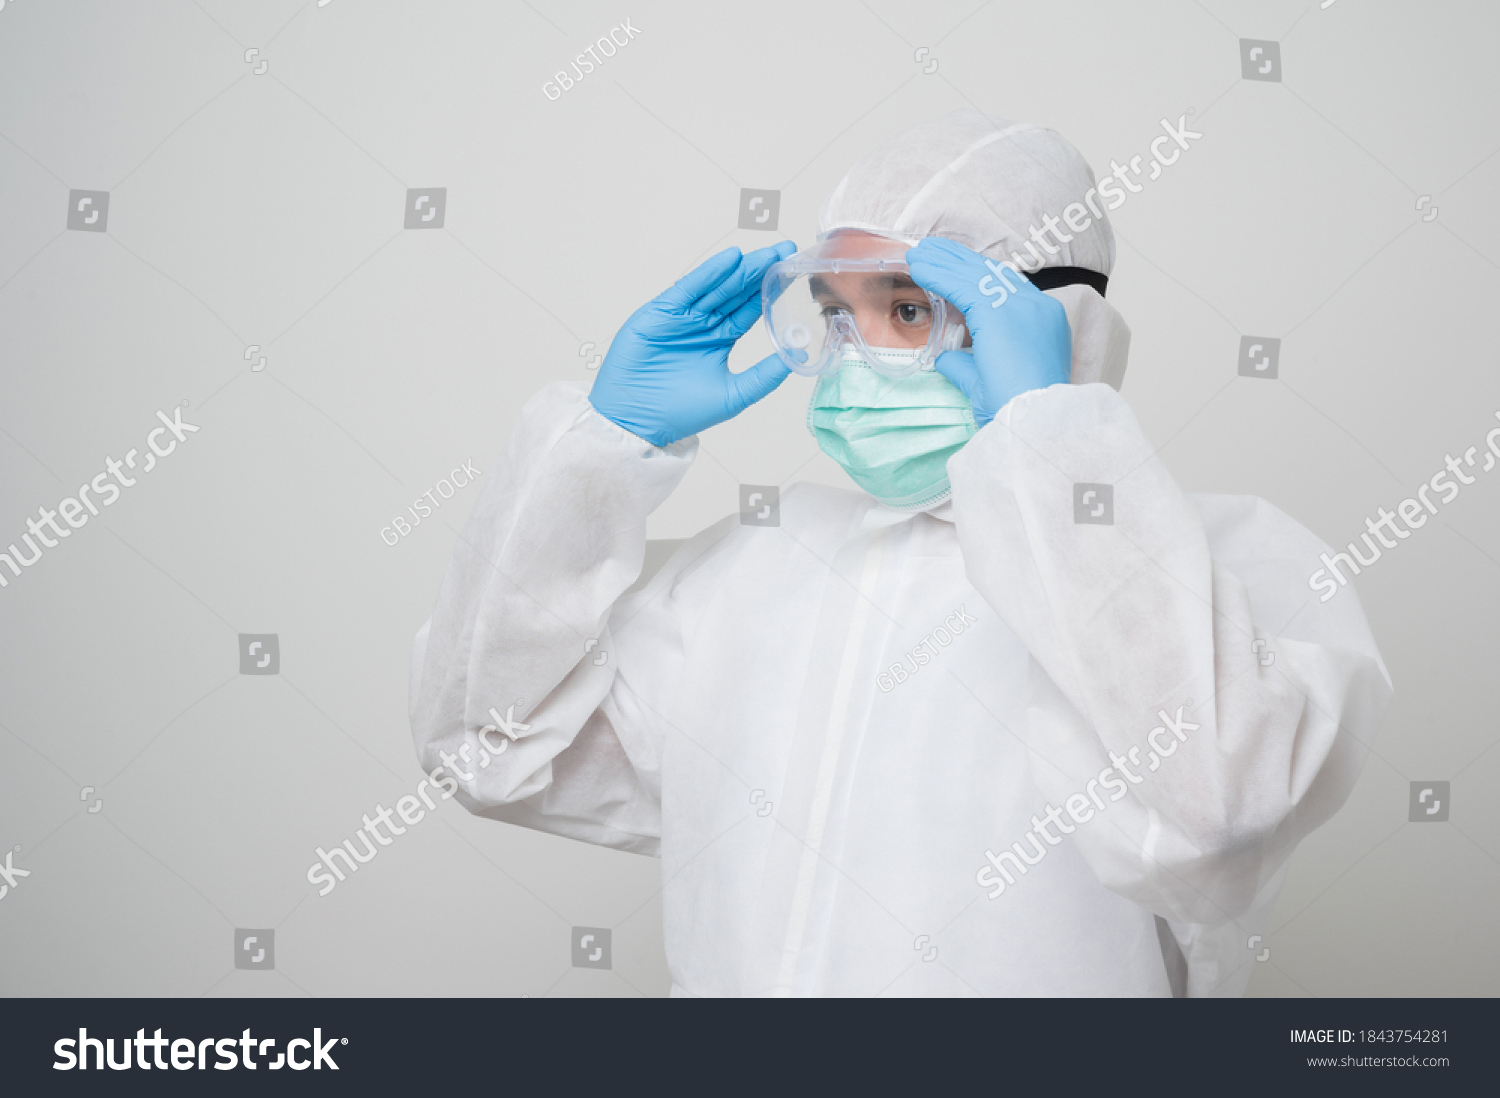 Portrait Virologist Wearing Ppe Suit Touching Stock Photo 1843754281 ...